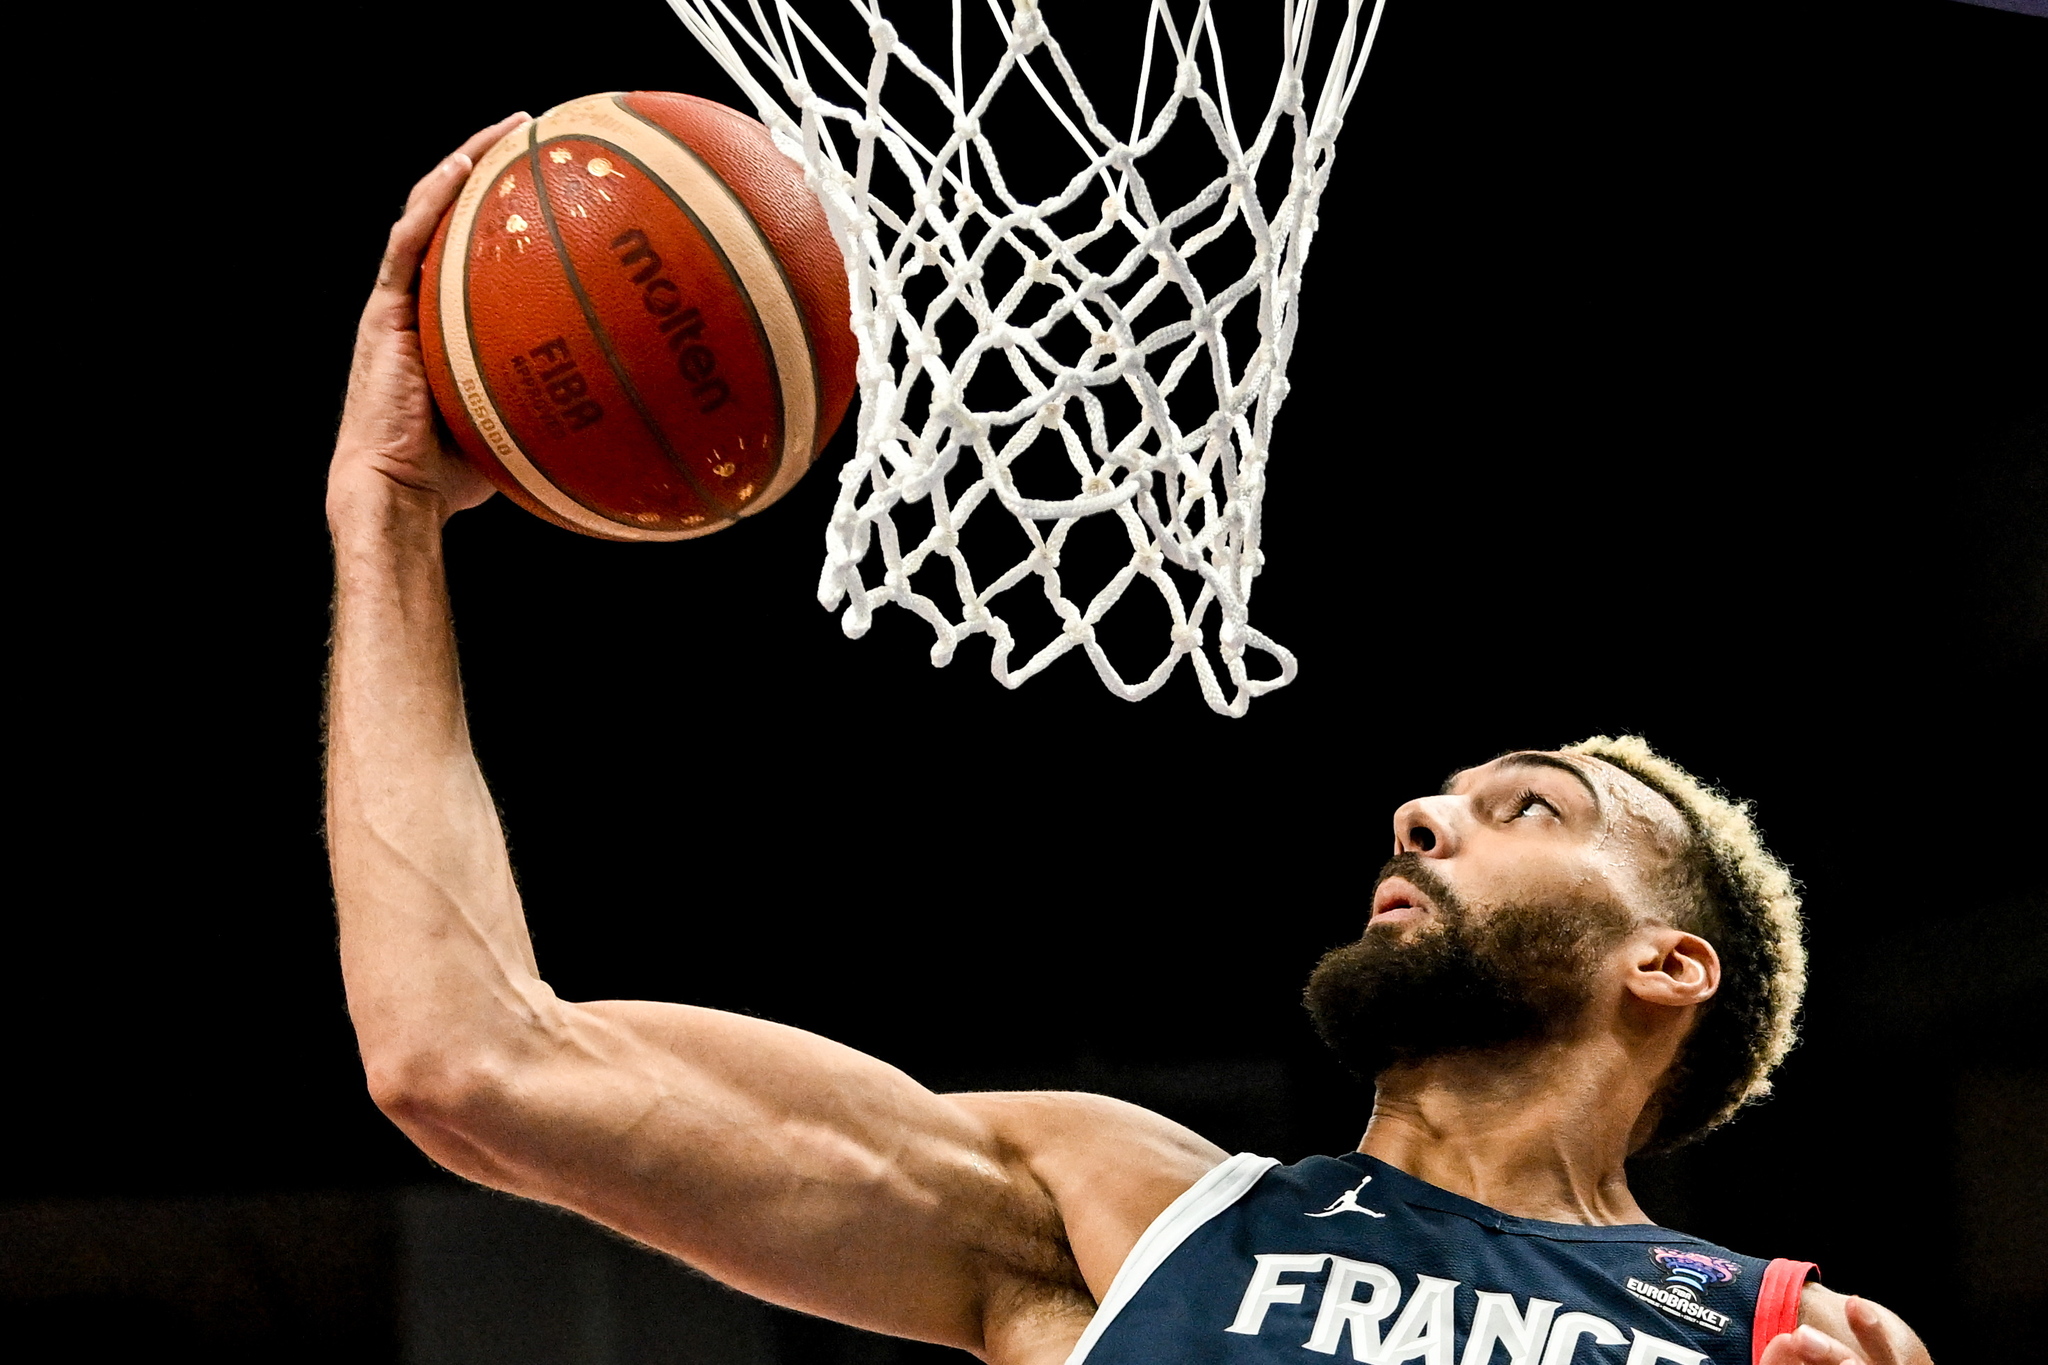  lt;HIT gt;Berlin lt;/HIT gt; (Germany), 16/09/2022.- Rudy Gobert of France in action during the FIBA EuroBasket 2022 semi final match between Poland and France at EuroBasket Arena in  lt;HIT gt;Berlin lt;/HIT gt;, Germany, 16 September 2022. (Baloncesto, Francia, Alemania, Polonia) EFE/EPA/FILIP SINGER